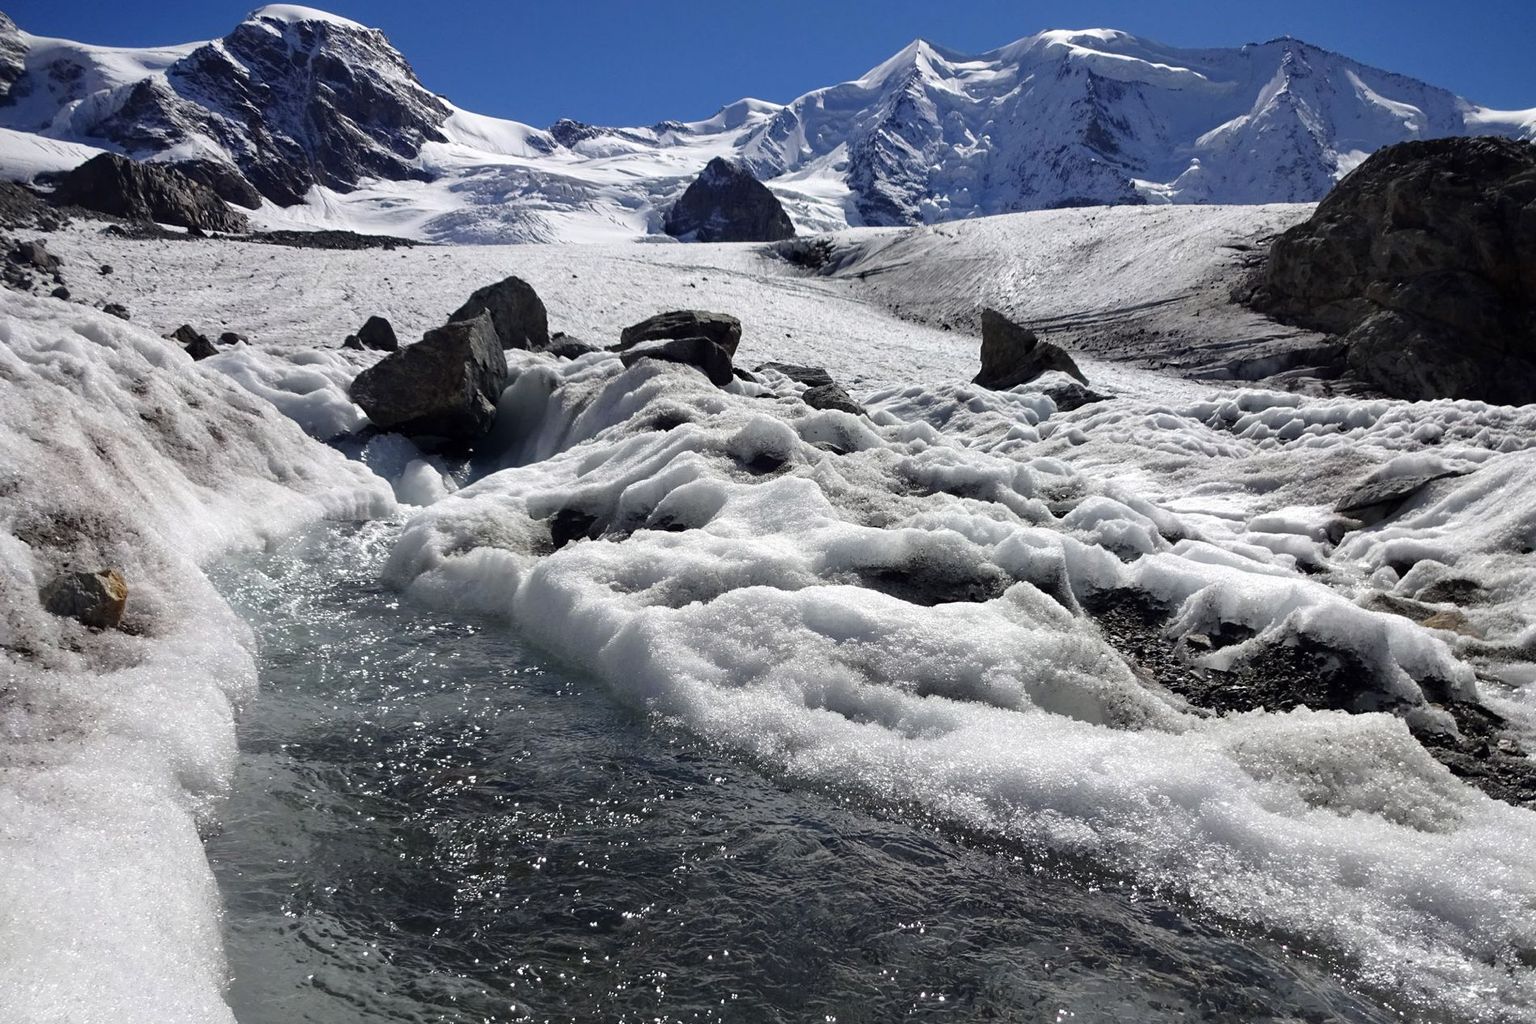 Meltwater streams on the Pers Glacier (GR). The summit regions are shining white as early as September due to fresh snow.